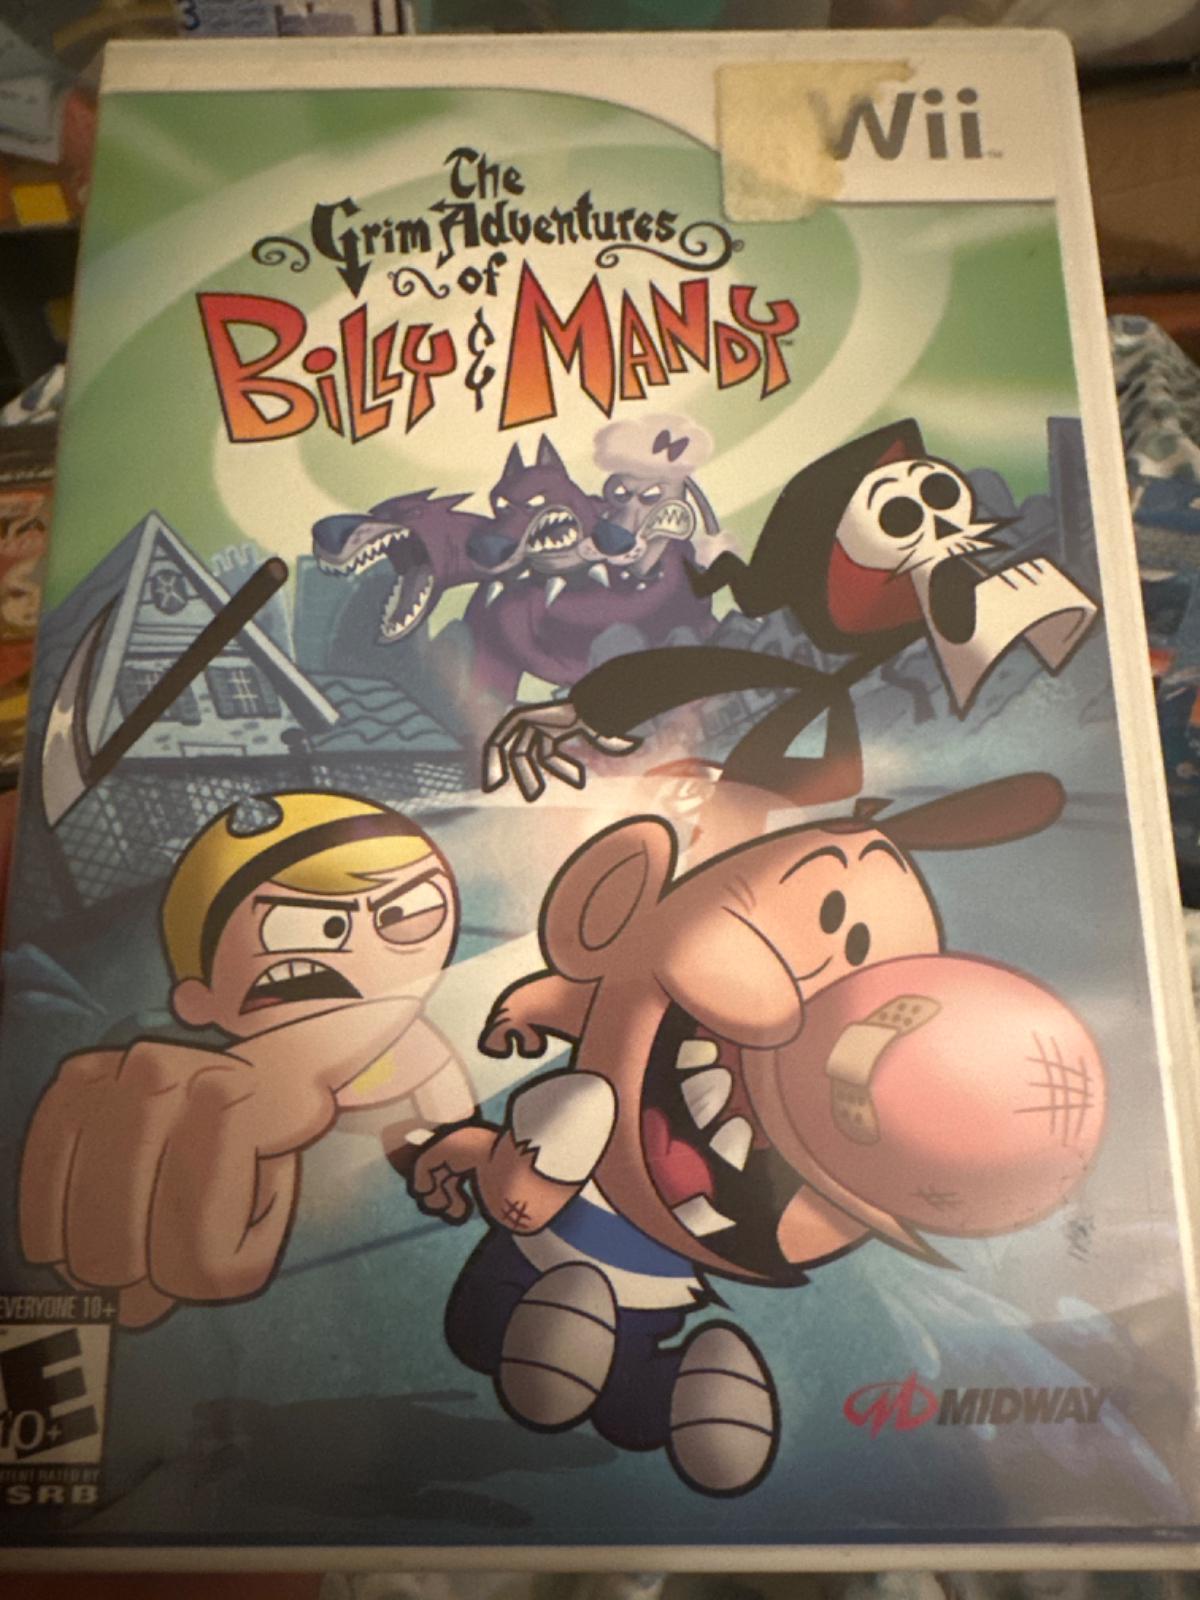 Grim Adventures of Billy & Mandy | Item, Box, and Manual | Wii